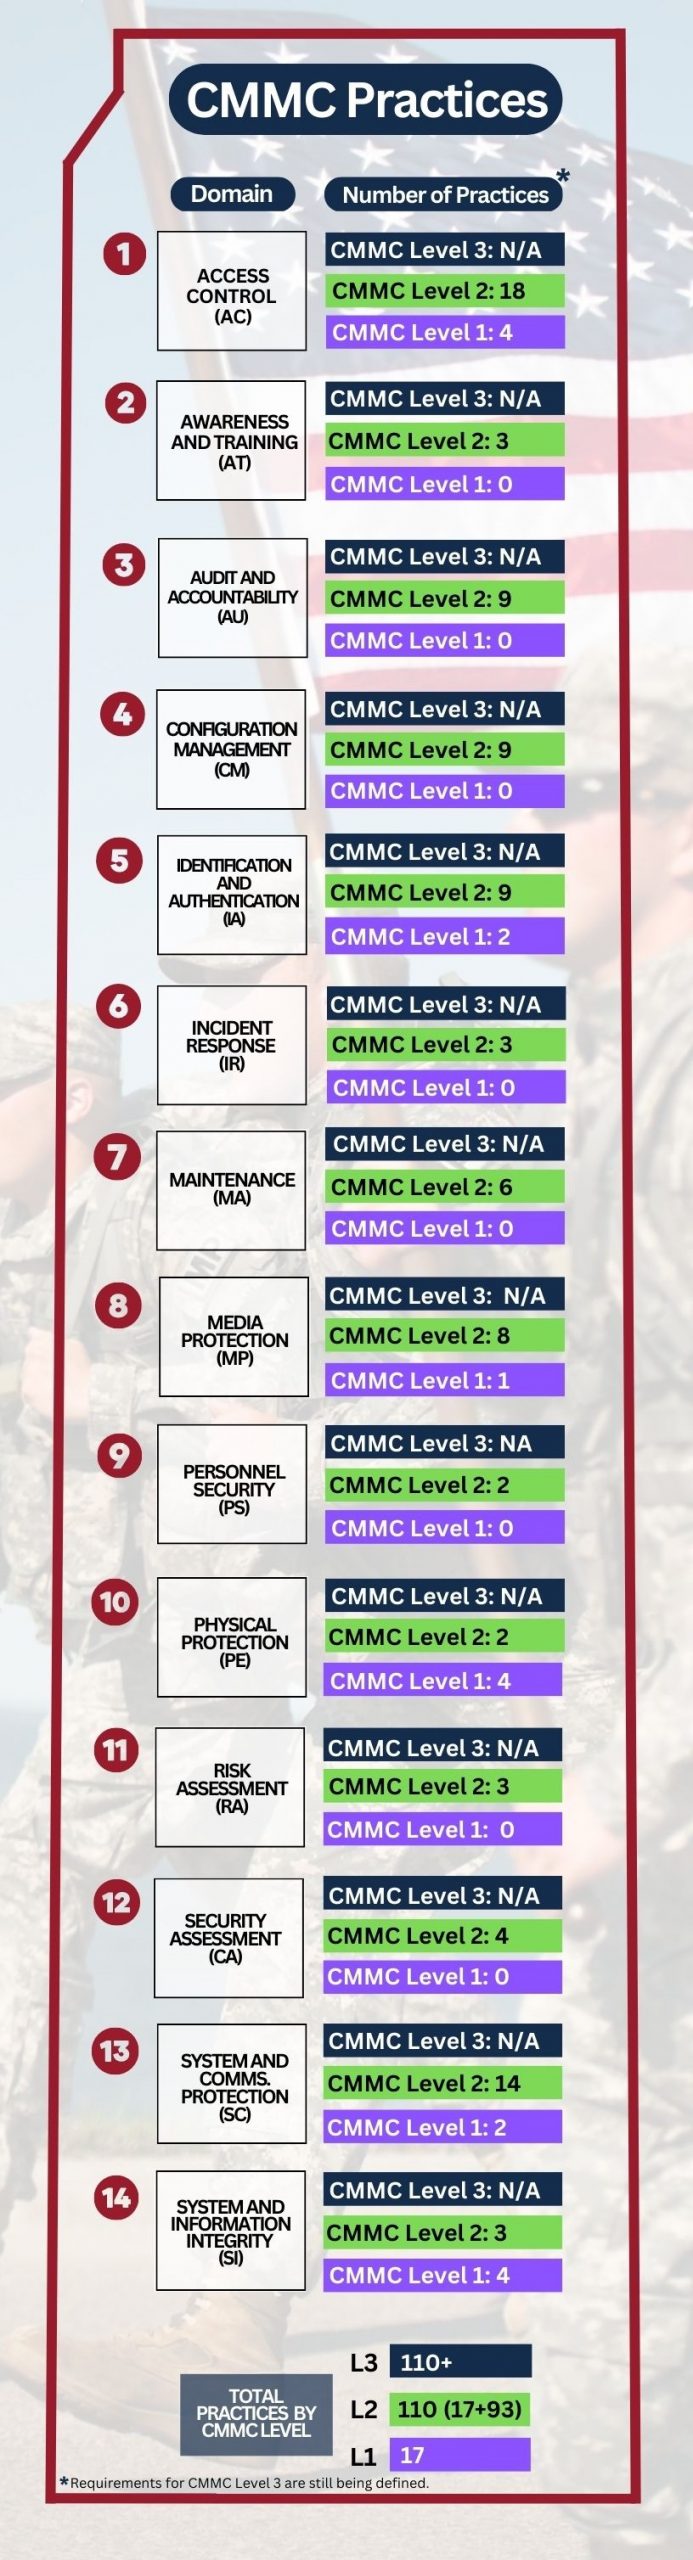 Chart detailing all 14 CMMC Domains, along with the number of practices (also known as CMMC controls) for each domain according to the CMMC level.